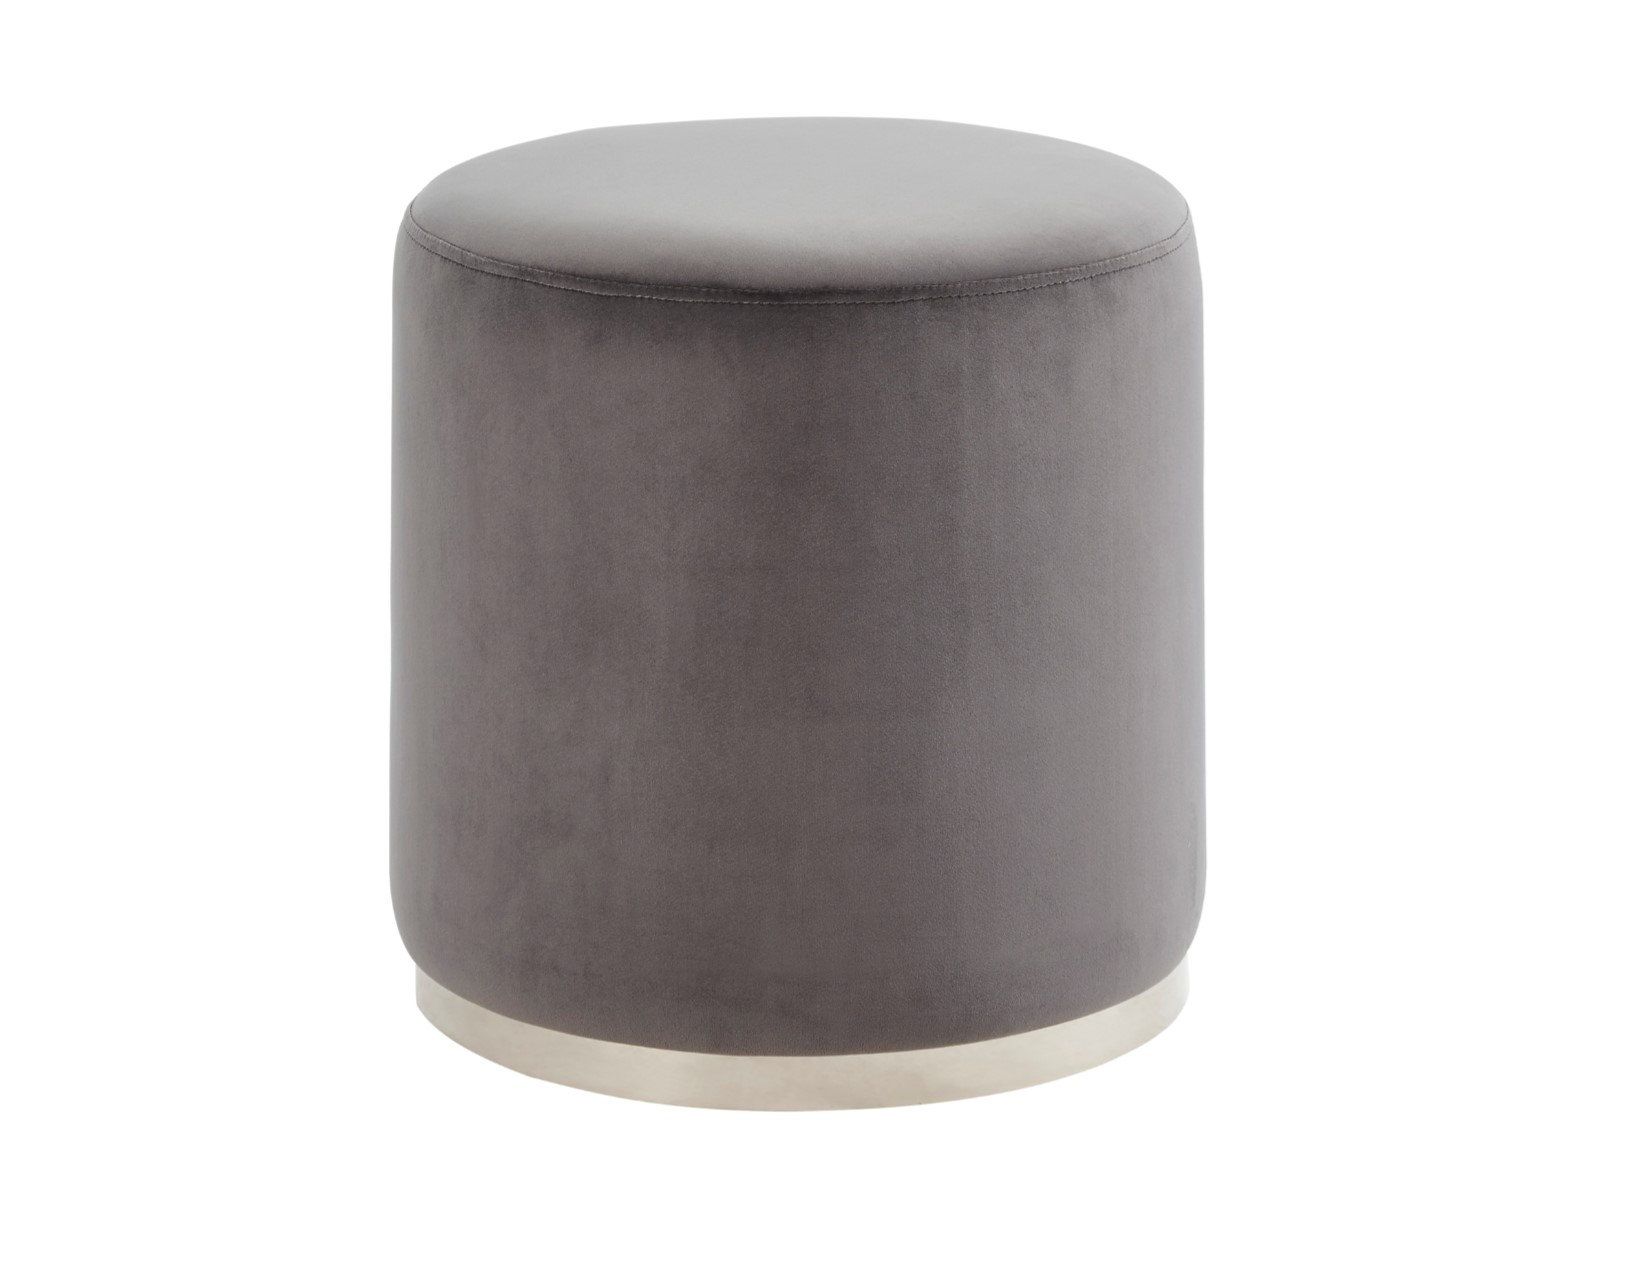 Allmodern Garland Upholstered Ottoman & Reviews | Wayfair For Upholstery Soft Silver Ottomans (View 4 of 15)